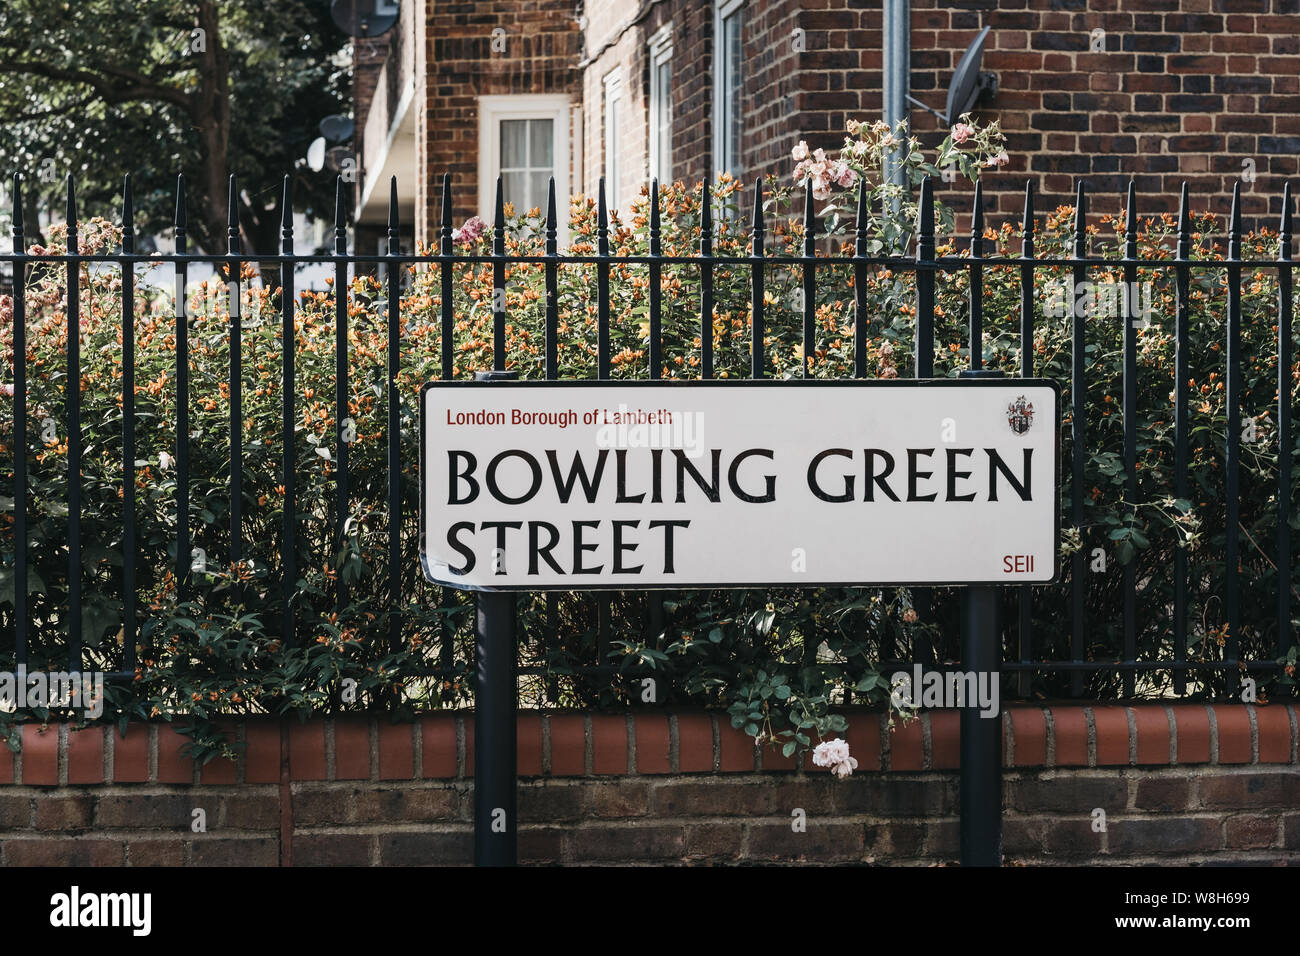 London, UK - July 16, 2019: Street name sign on a fence in Bowling Green Street in Lambeth, a borough in South London, England, which forms part of In Stock Photo